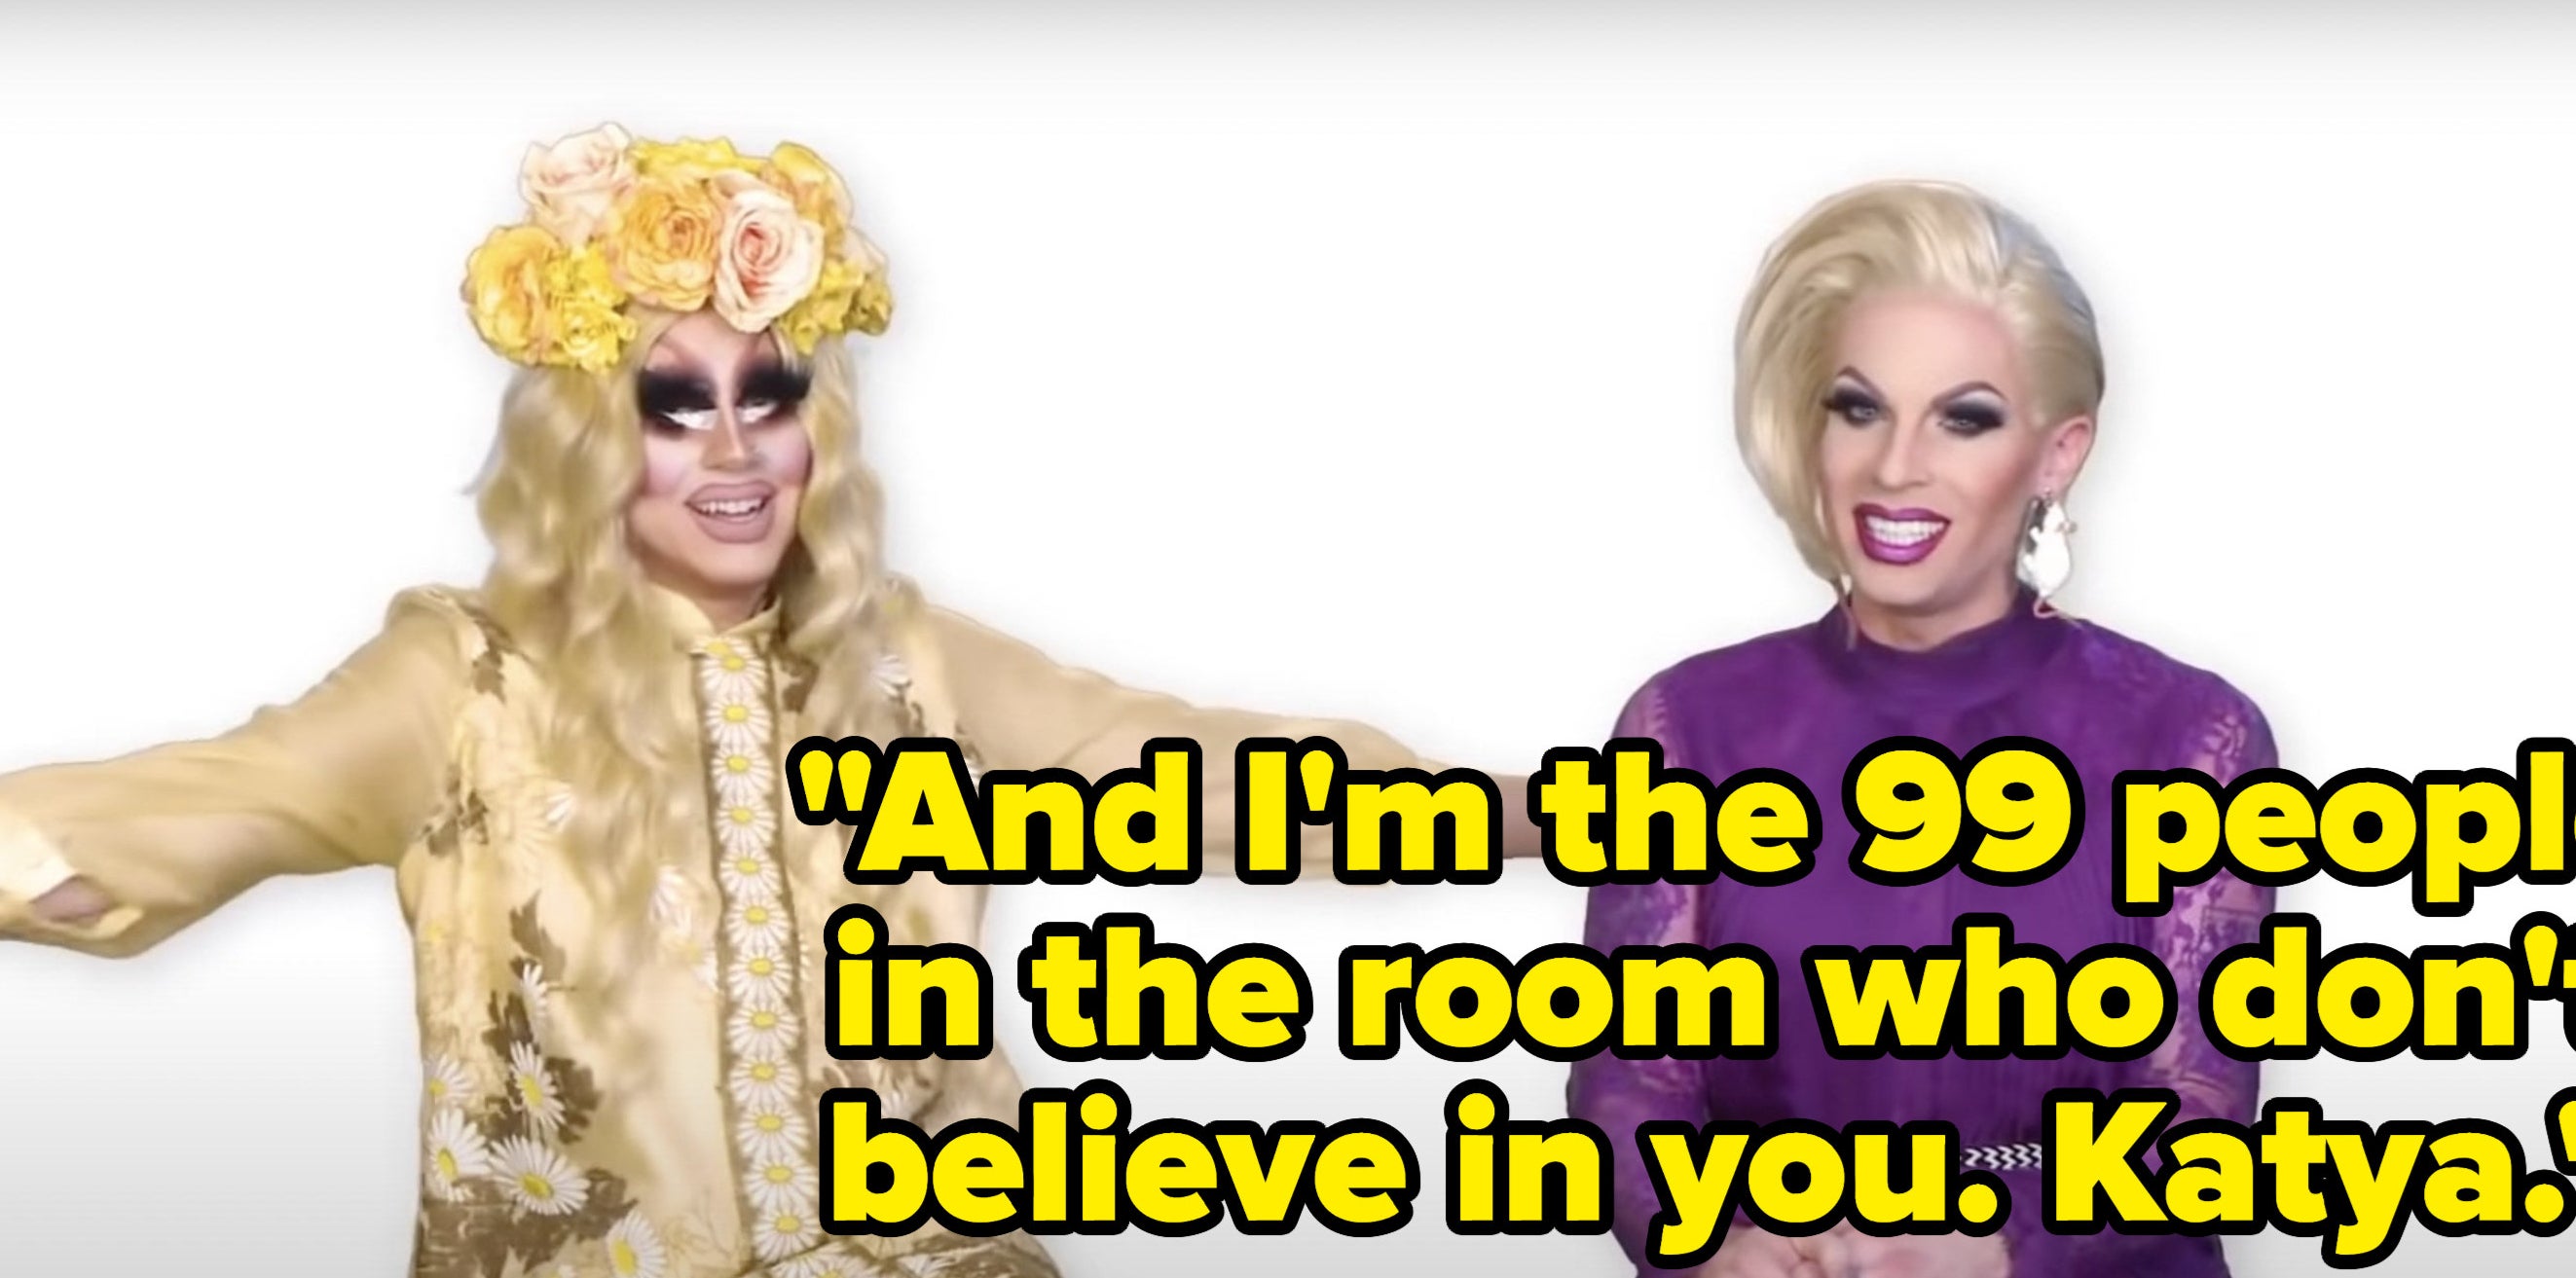 Katya says, And Im the 99 people in the room who dont believe in you, Katya